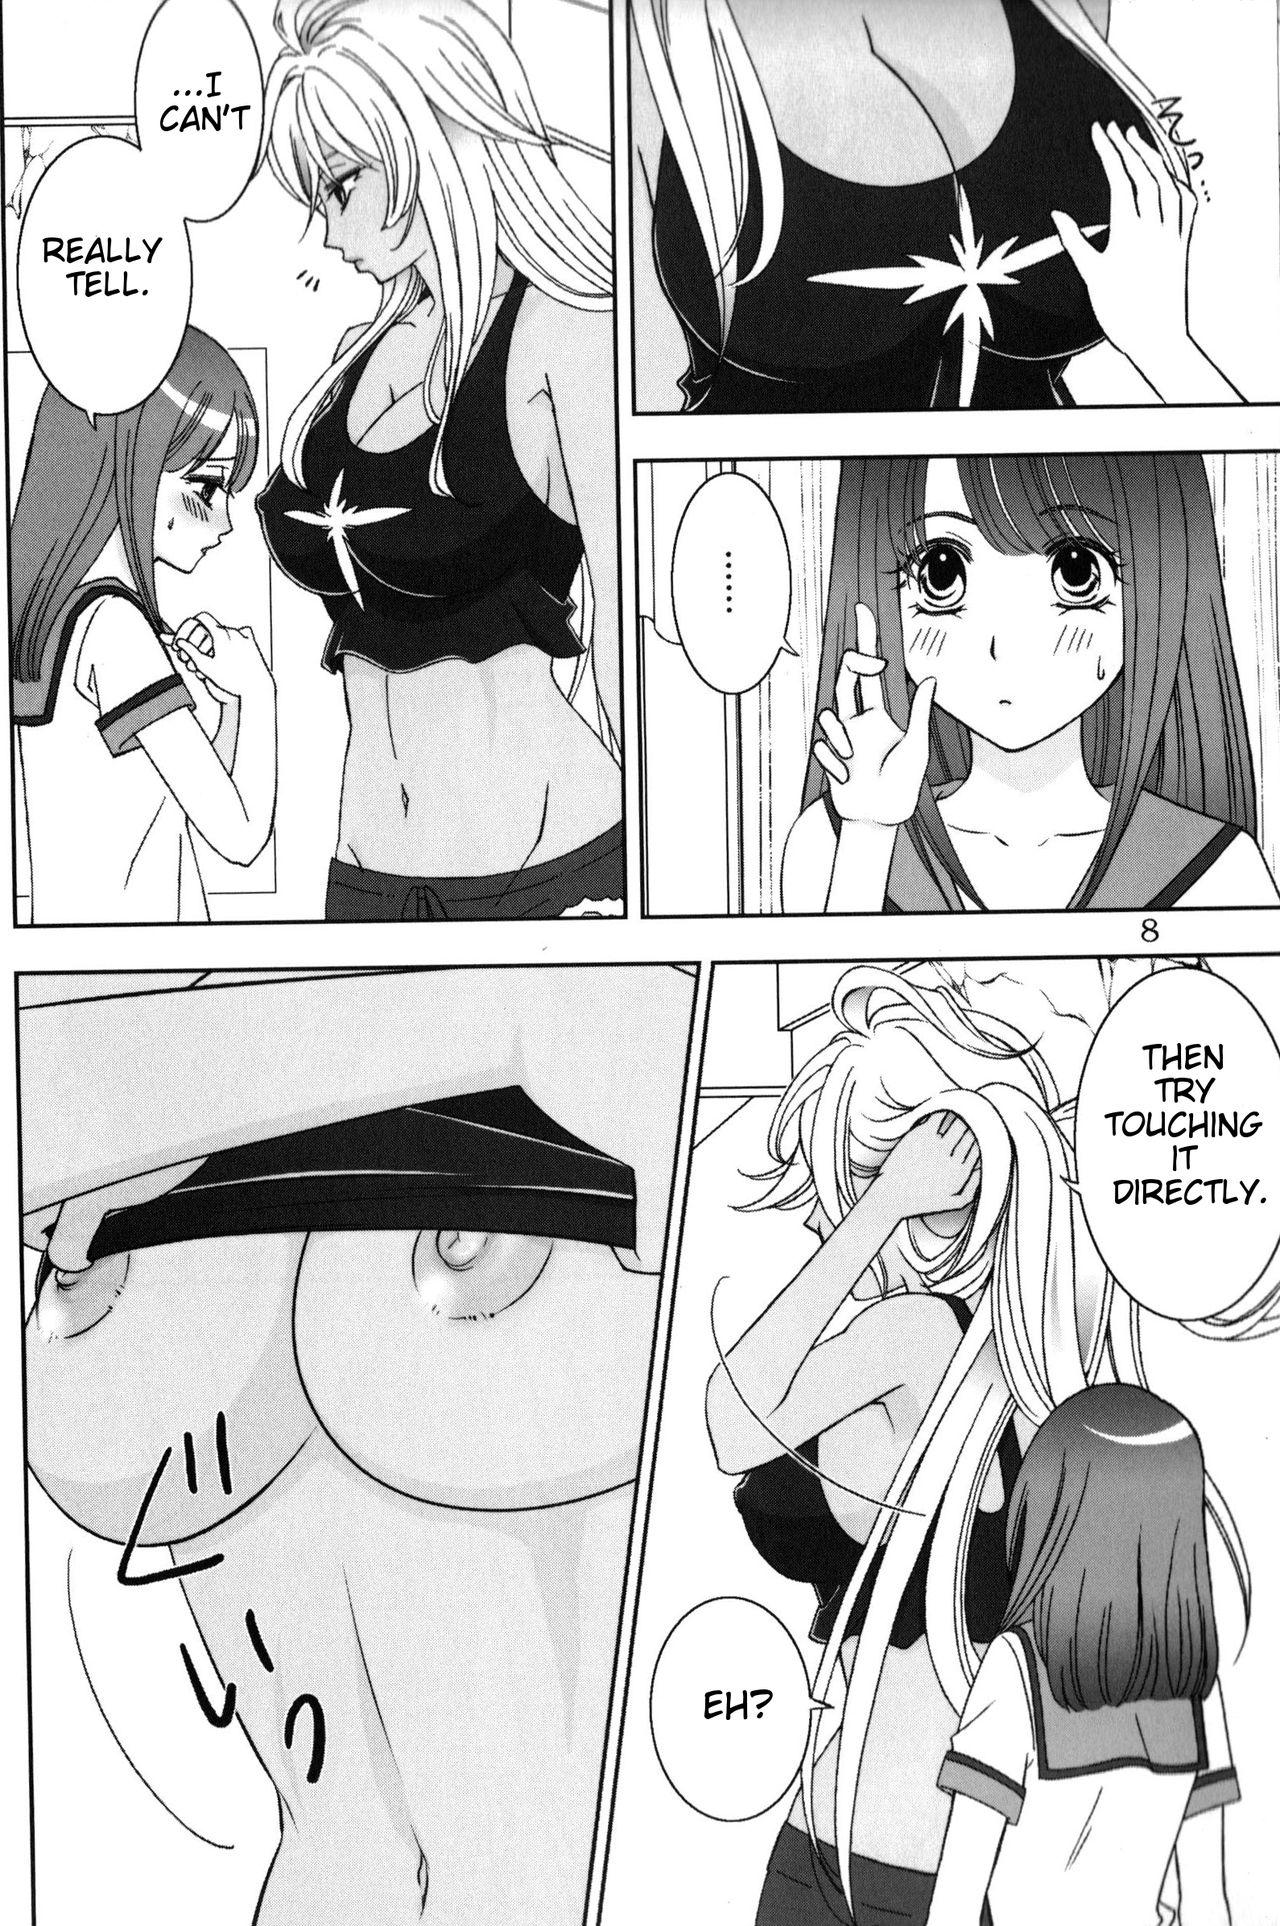 Chica Give it Away - Valkyrie drive Village - Page 7